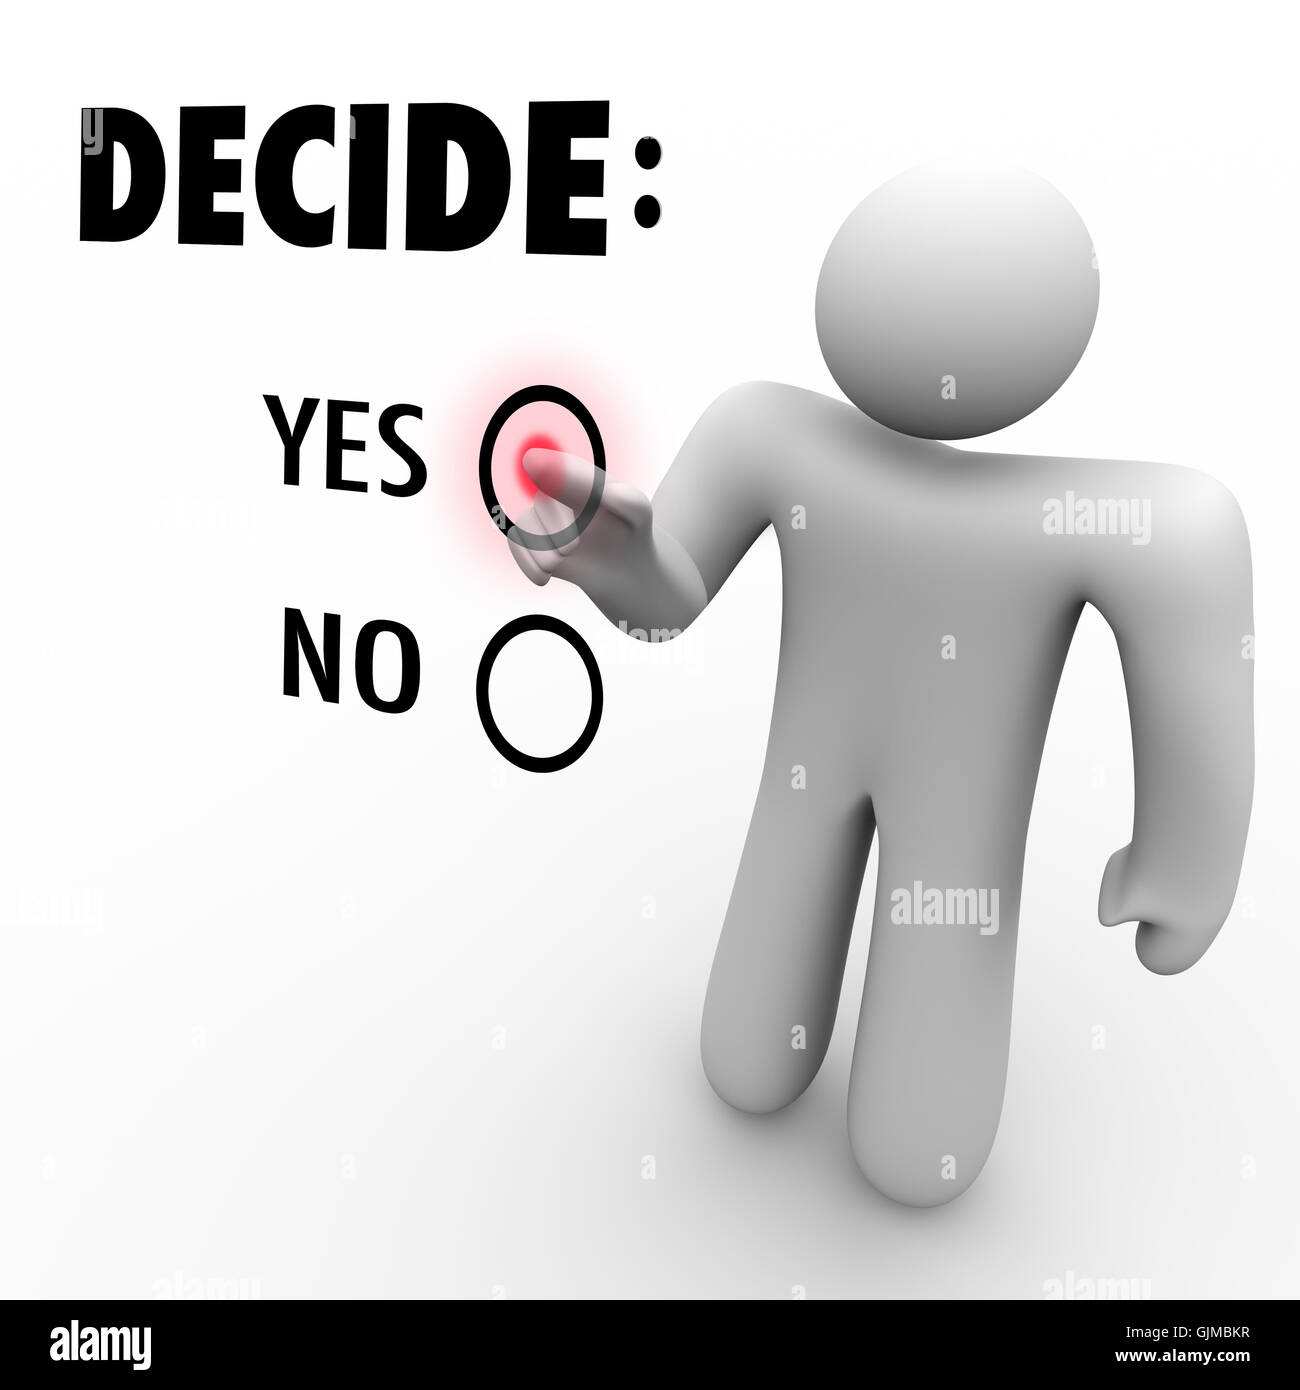 Decide Yes or No - Man at Touch Screen Stock Photo